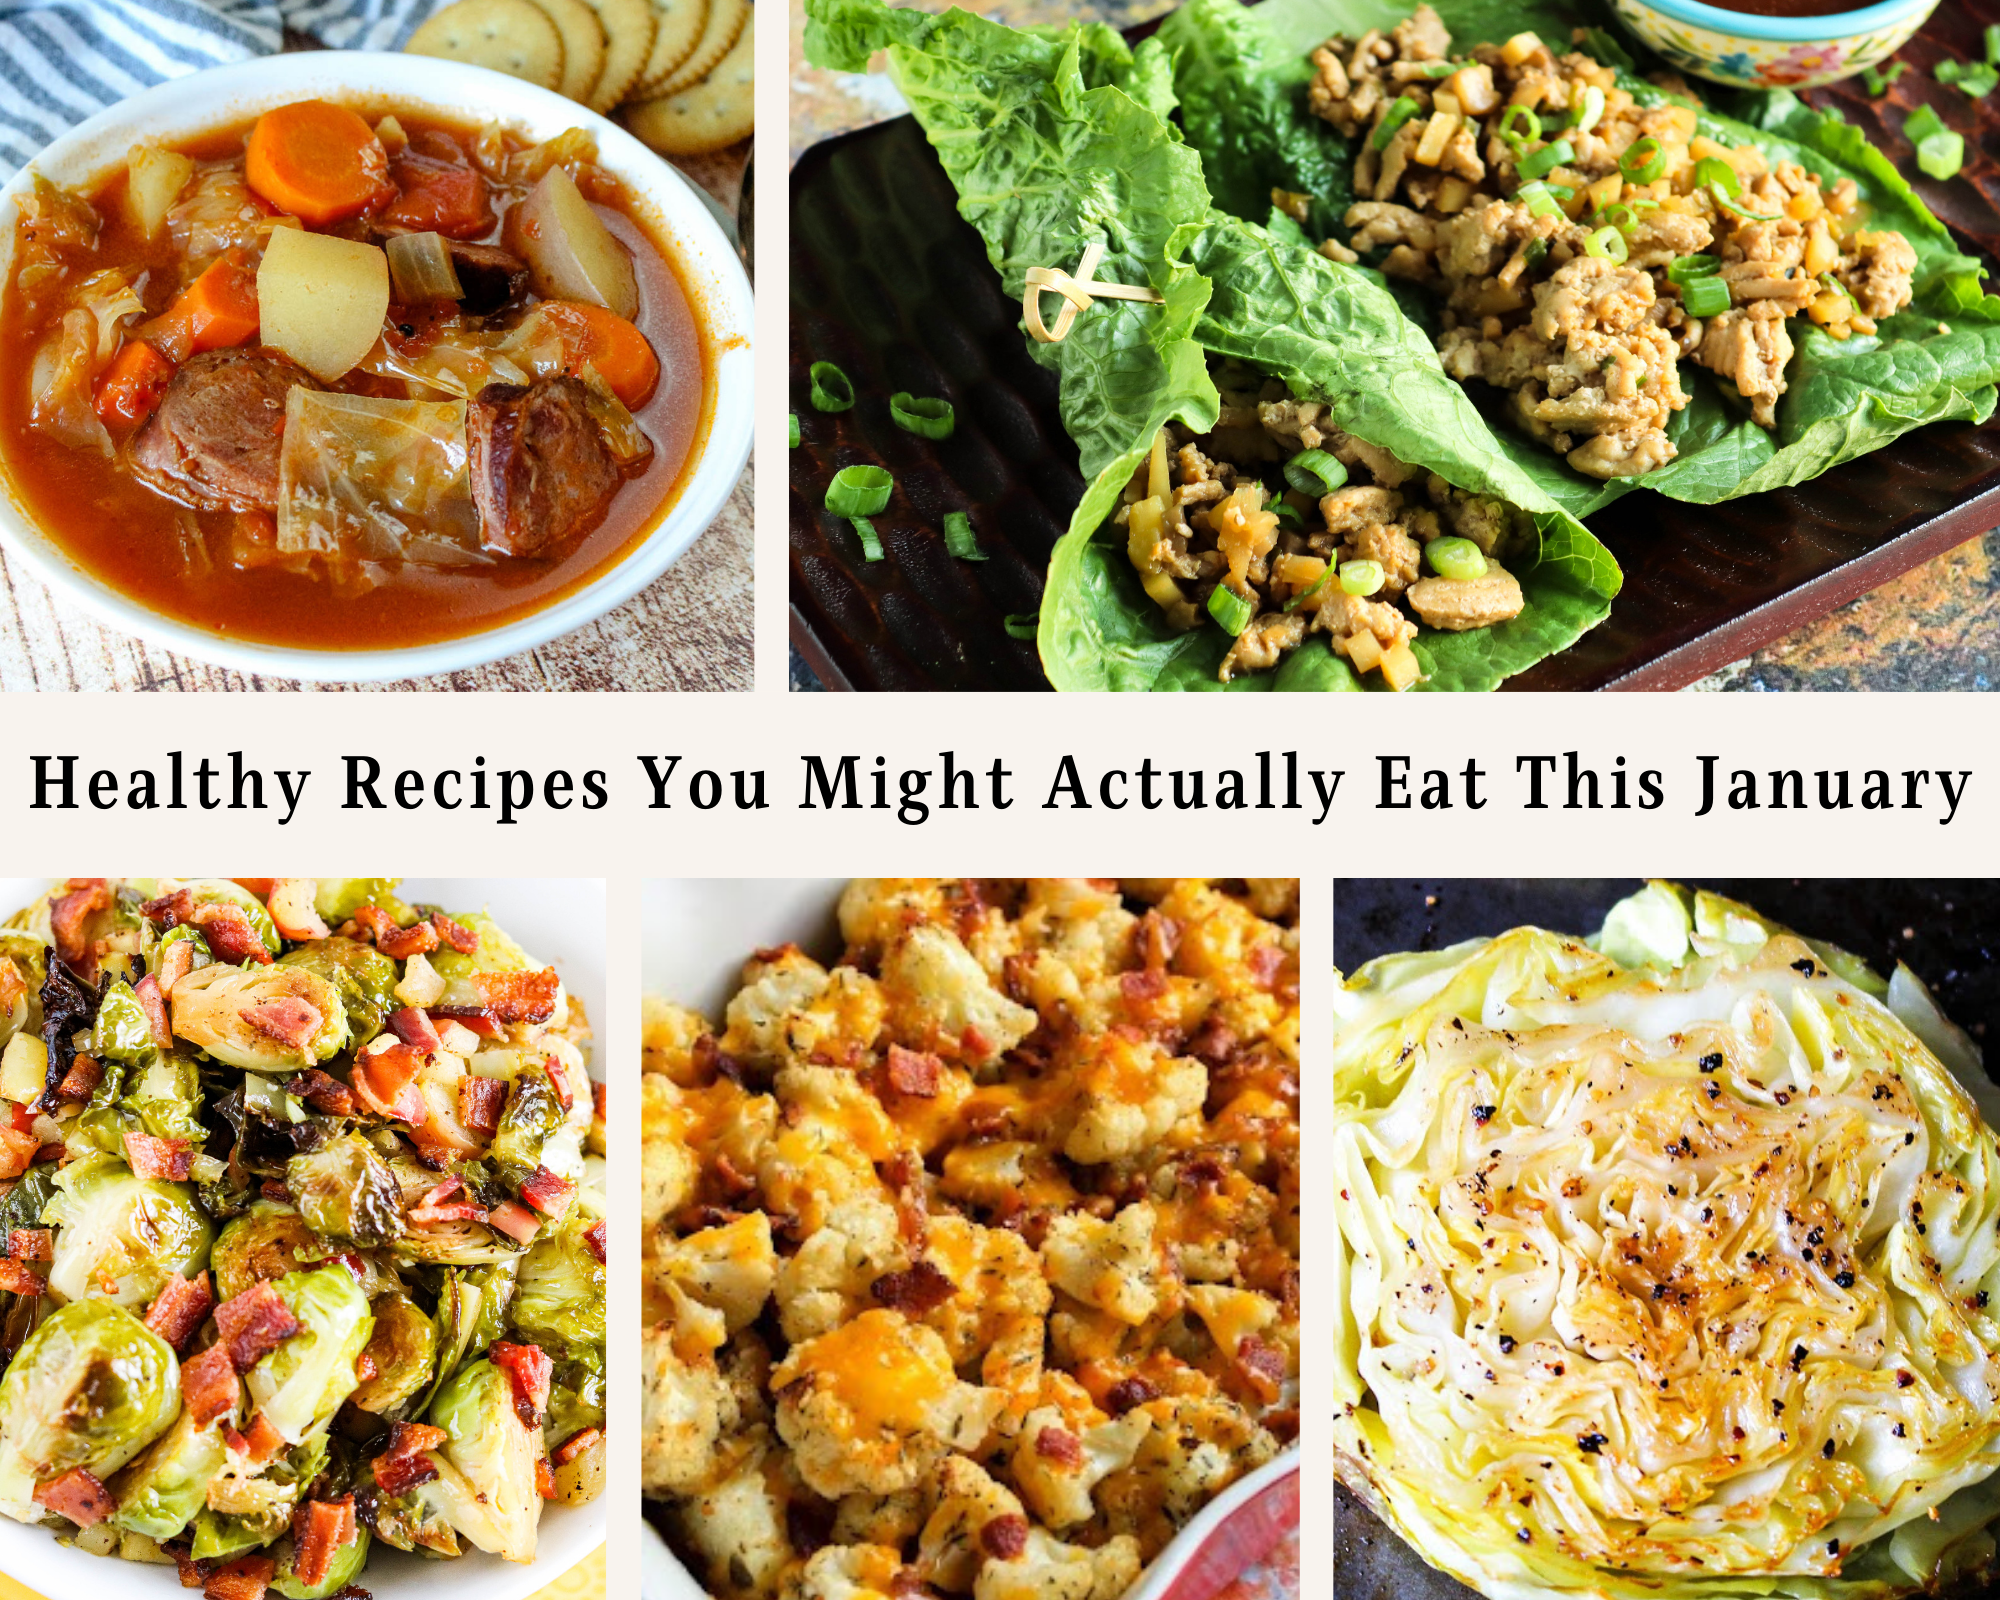 Healthy Recipes You Might Actually Eat This January